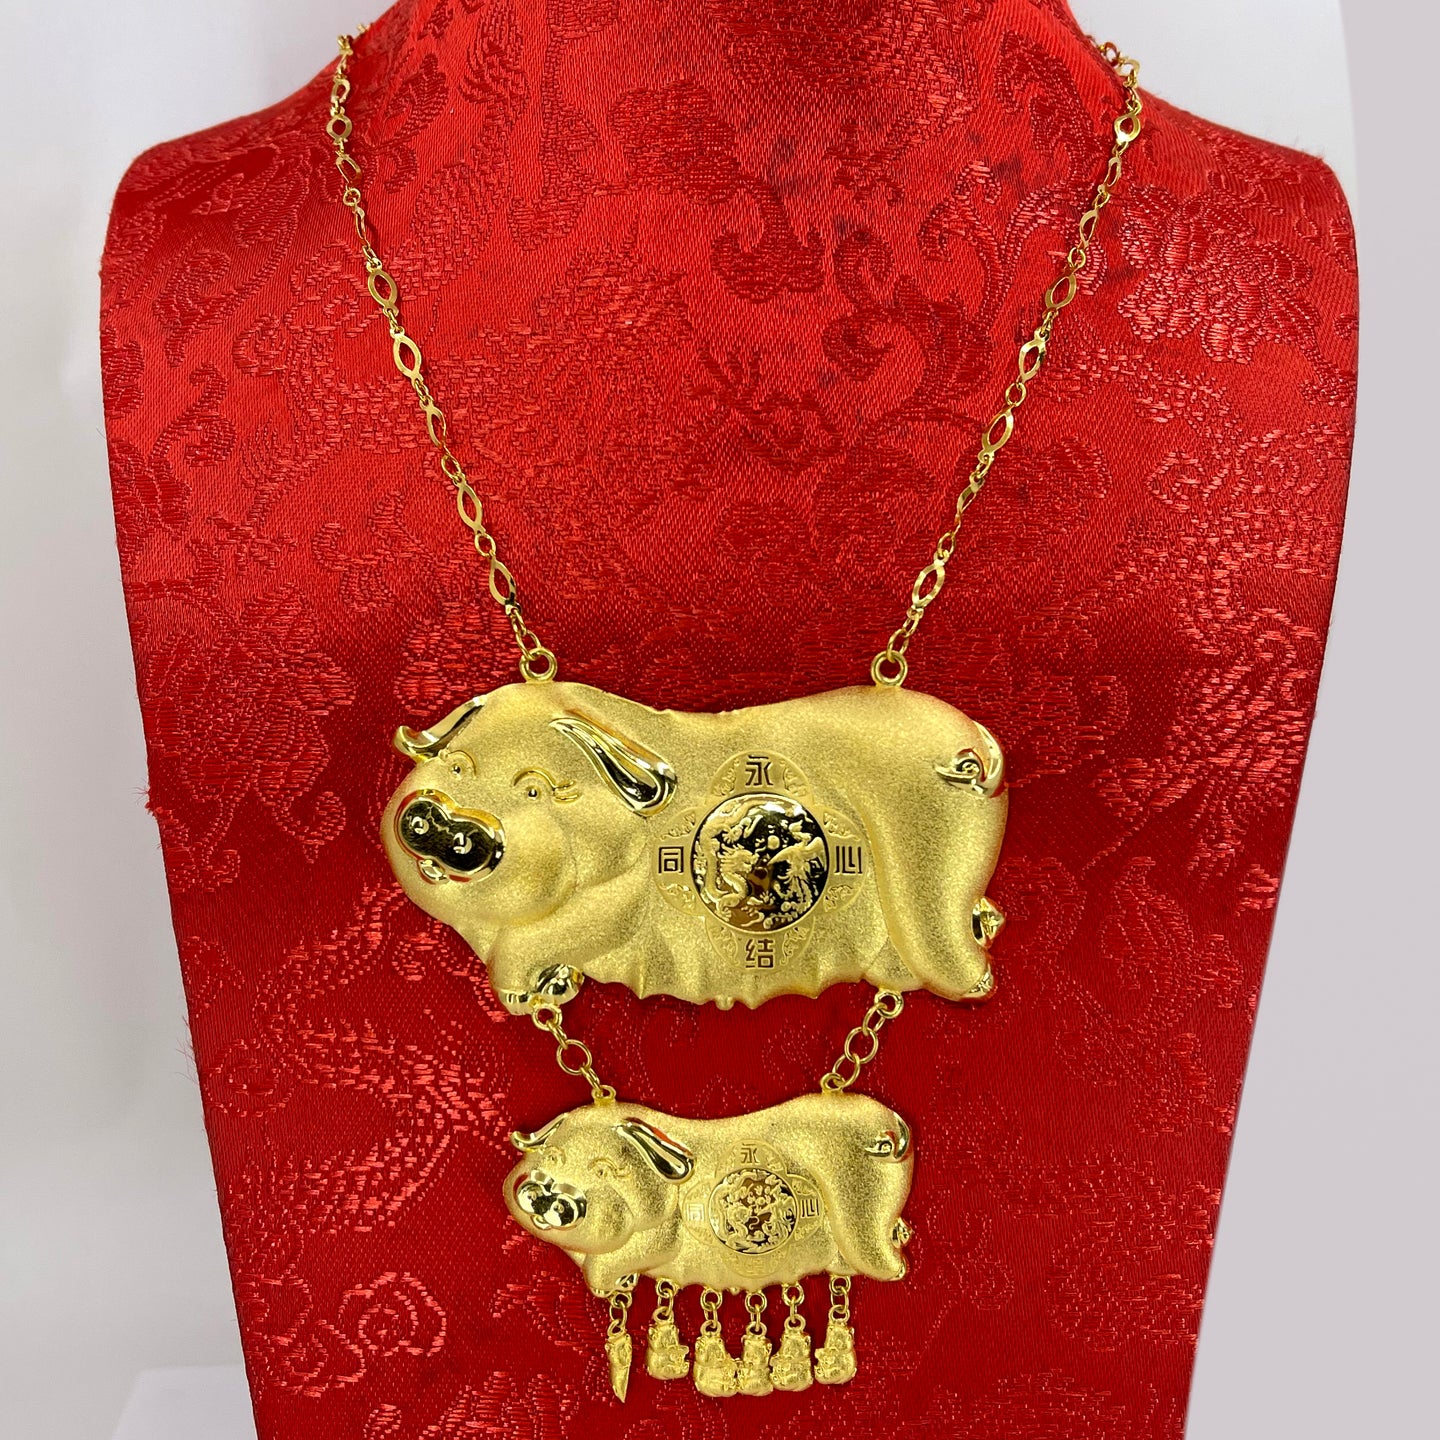 24K Solid Yellow Gold Wedding Pig Piglets Chain Necklace 16.7 Grams 17.5